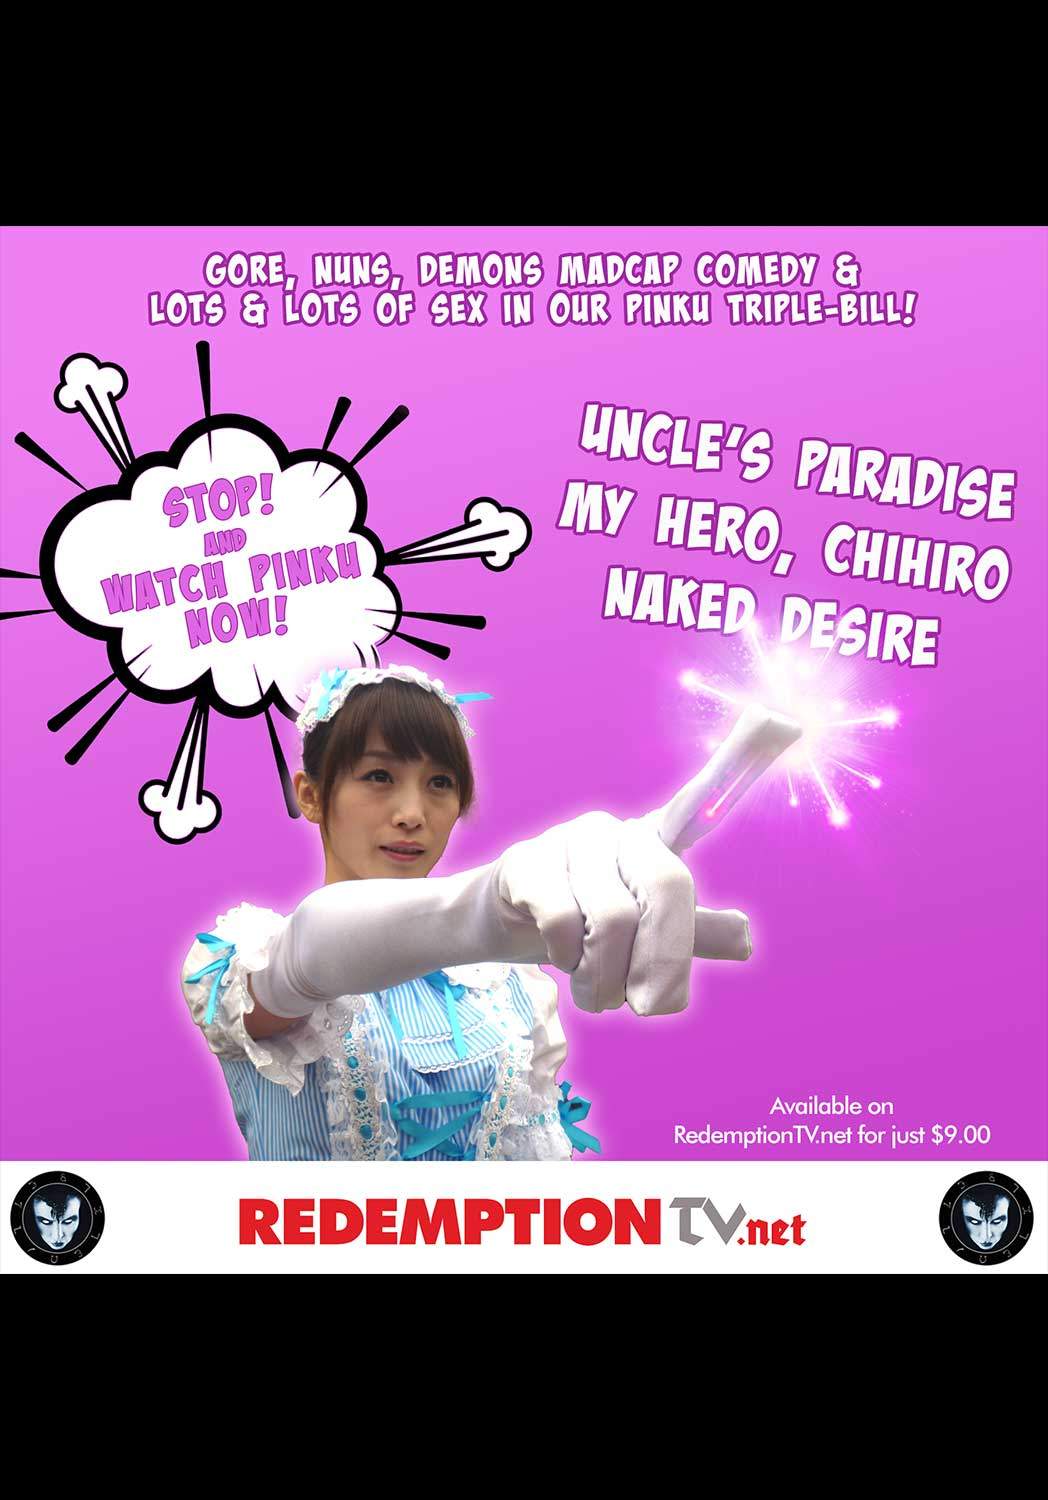 Three hilarious examples of truly madcap Japanese Pink Cinema, for $9 on Redemption TV